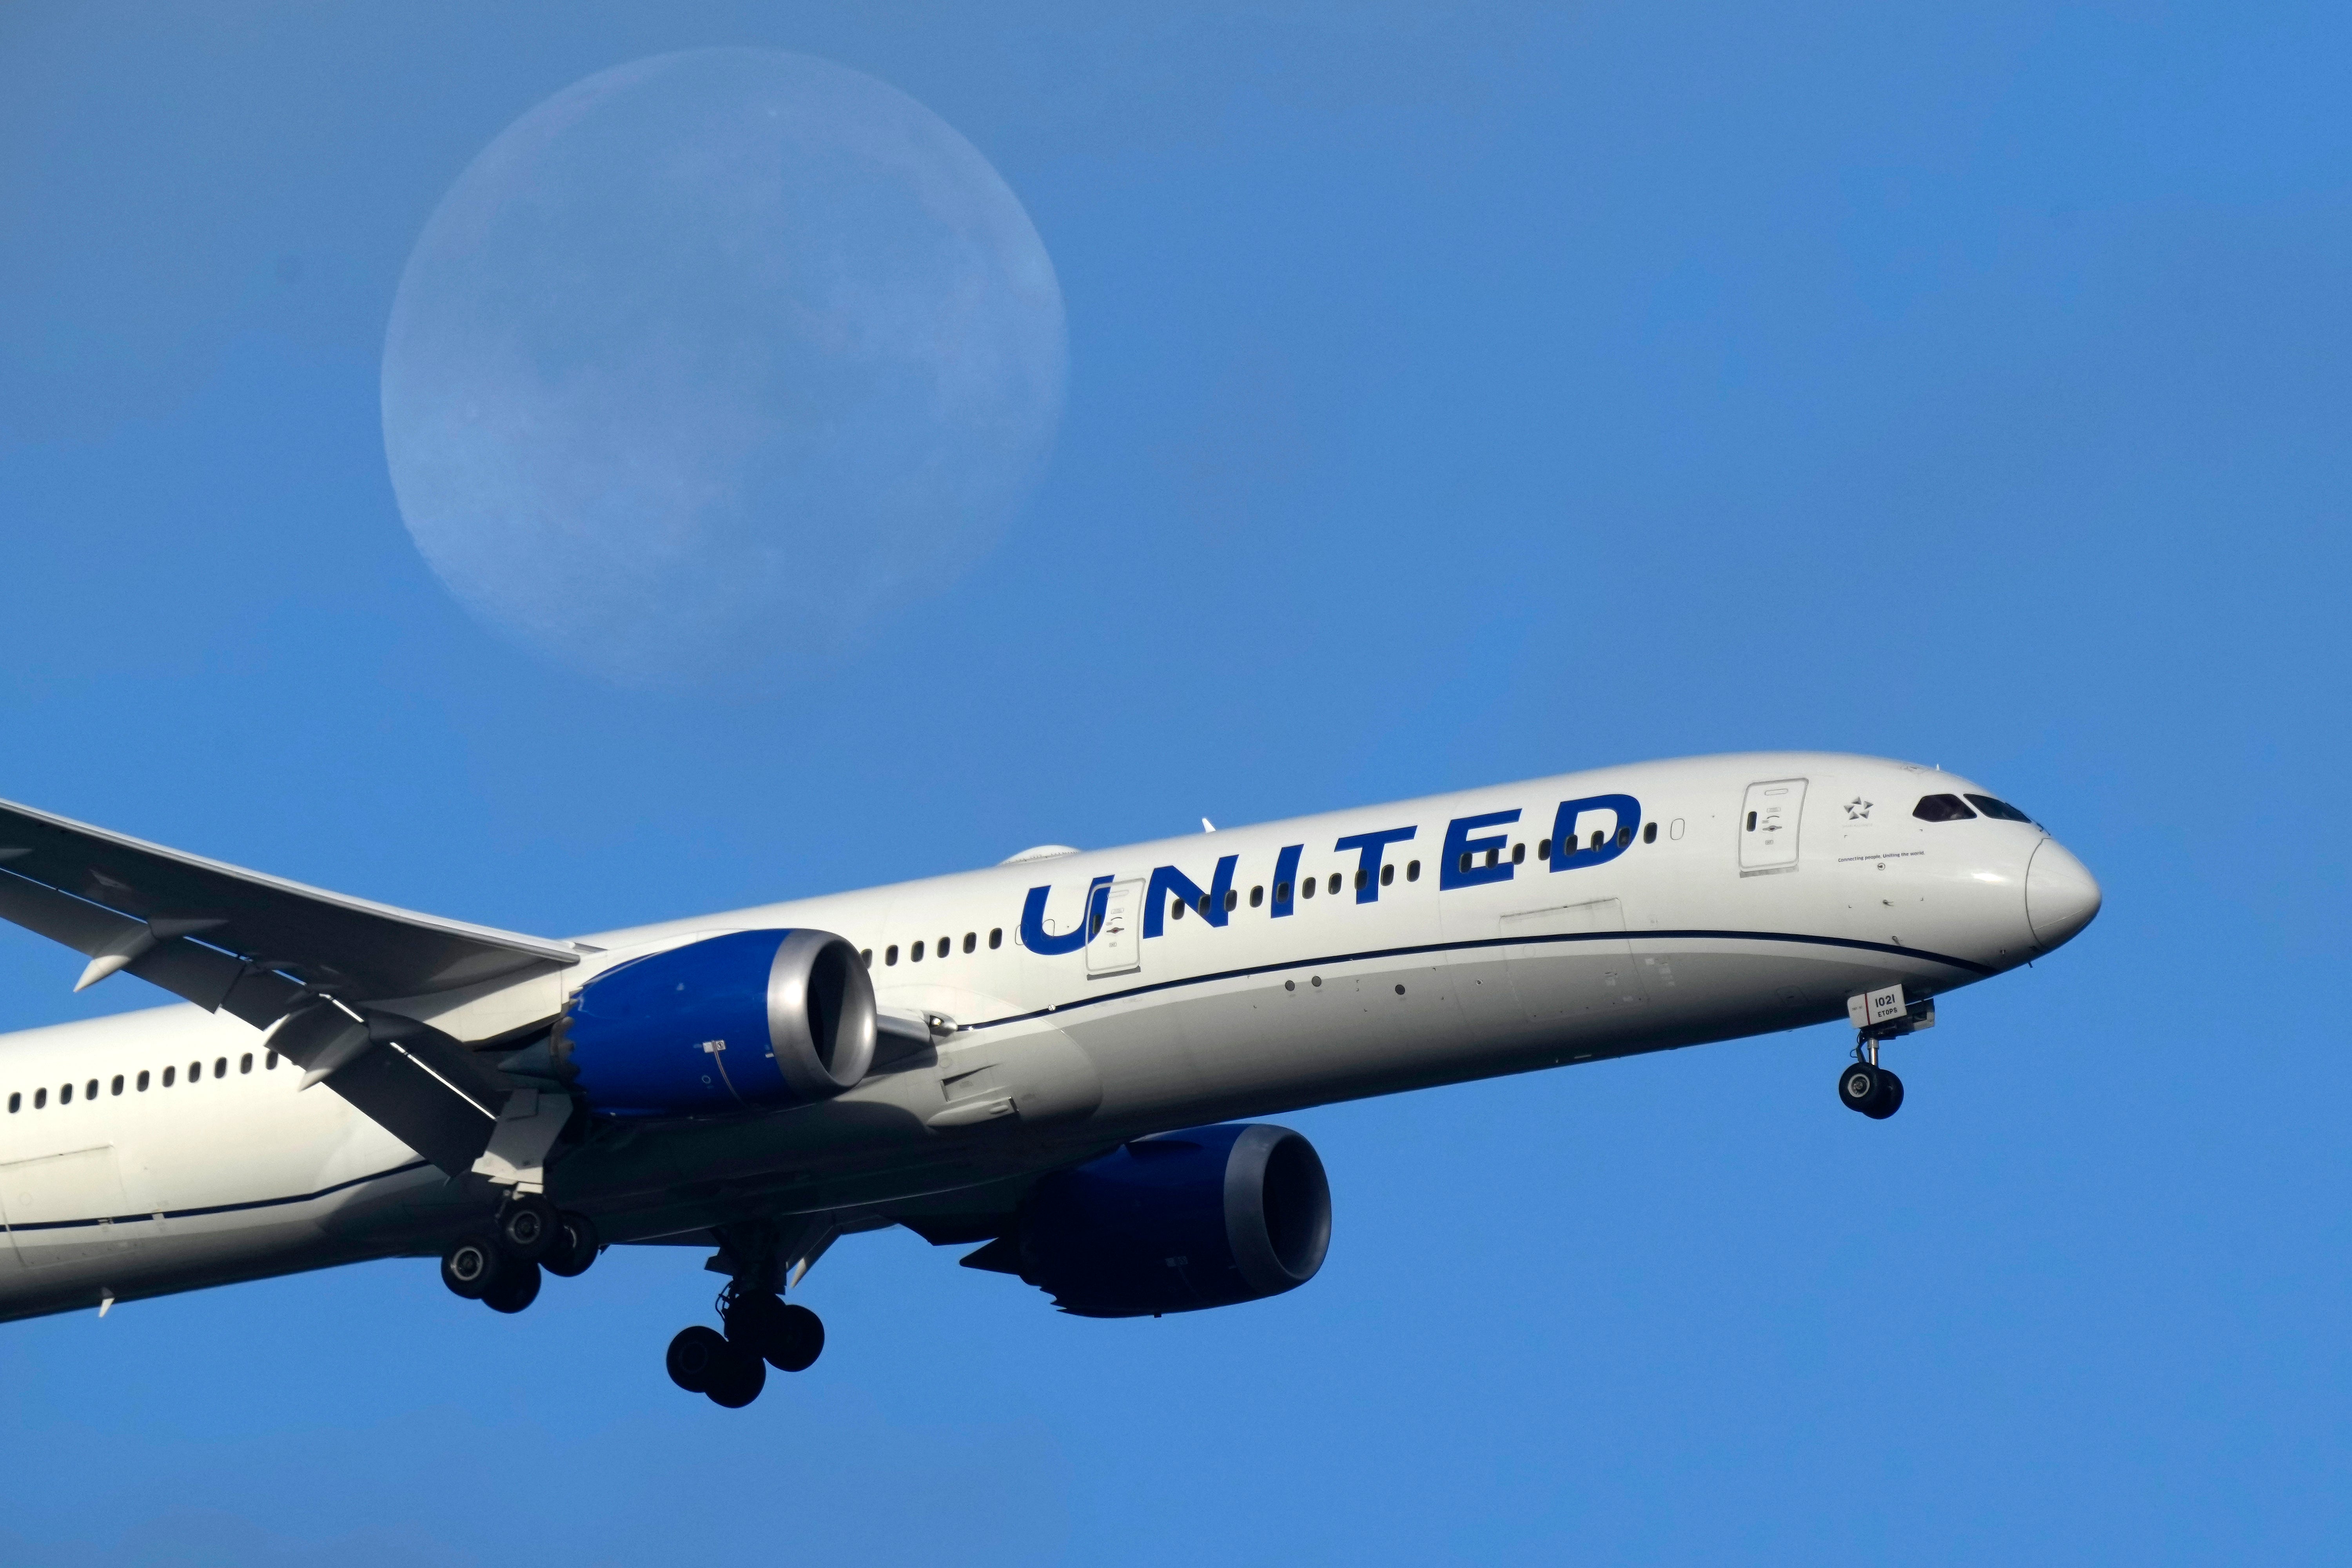 United Airlines made a precautionary premature landing after the flight crew noticed an issue with the plane’s ‘door indicator light’